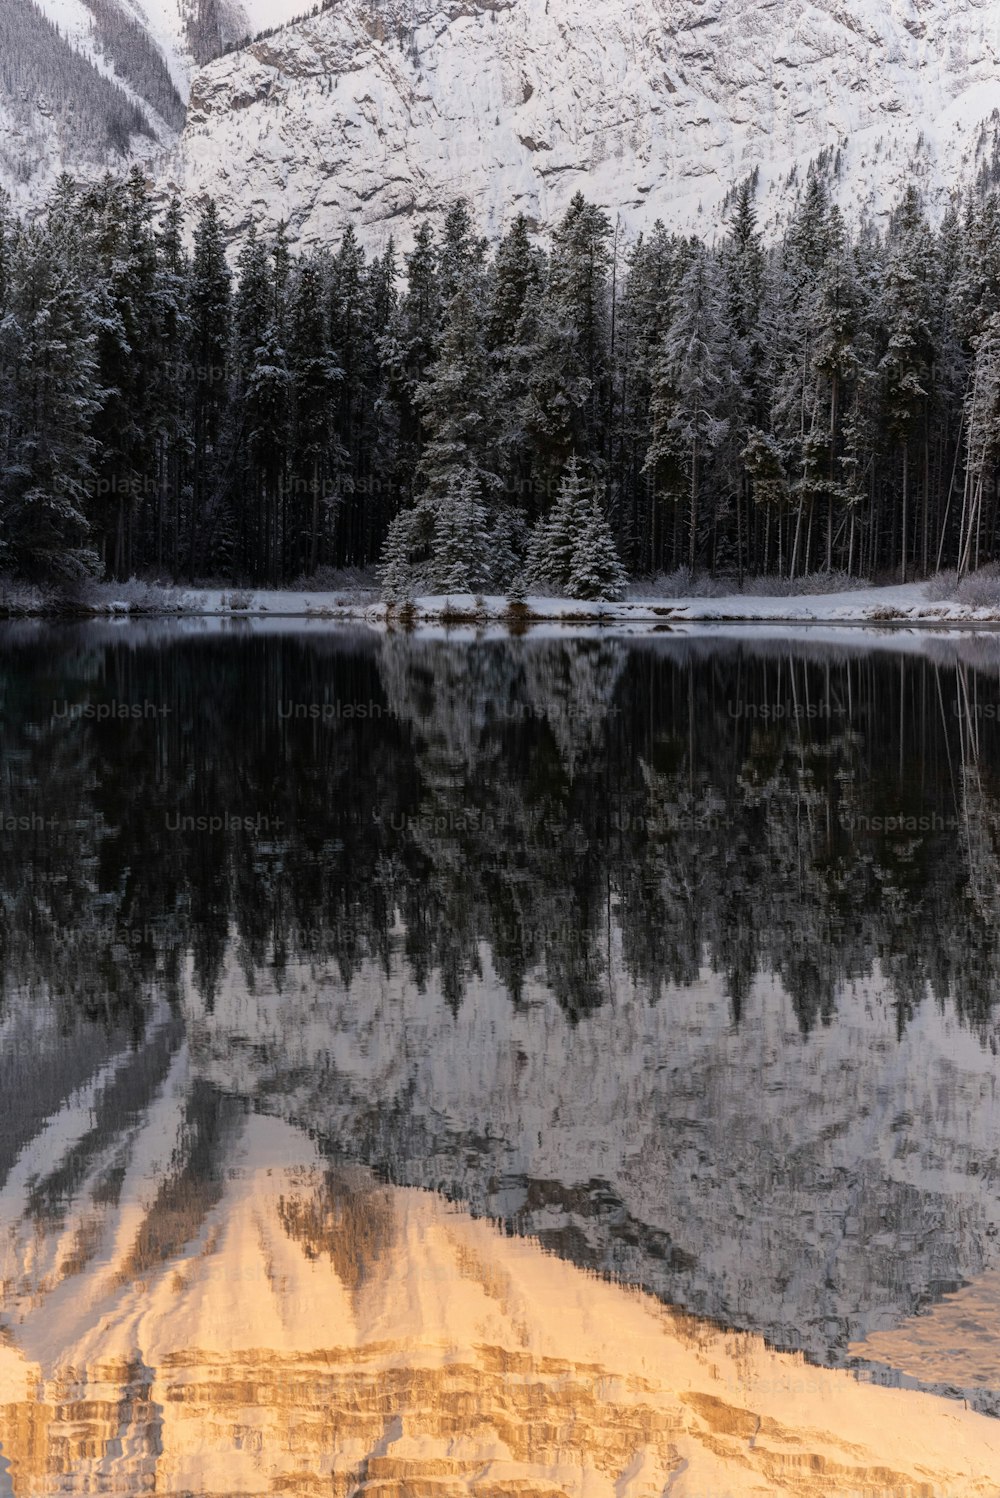 a lake surrounded by snow and trees